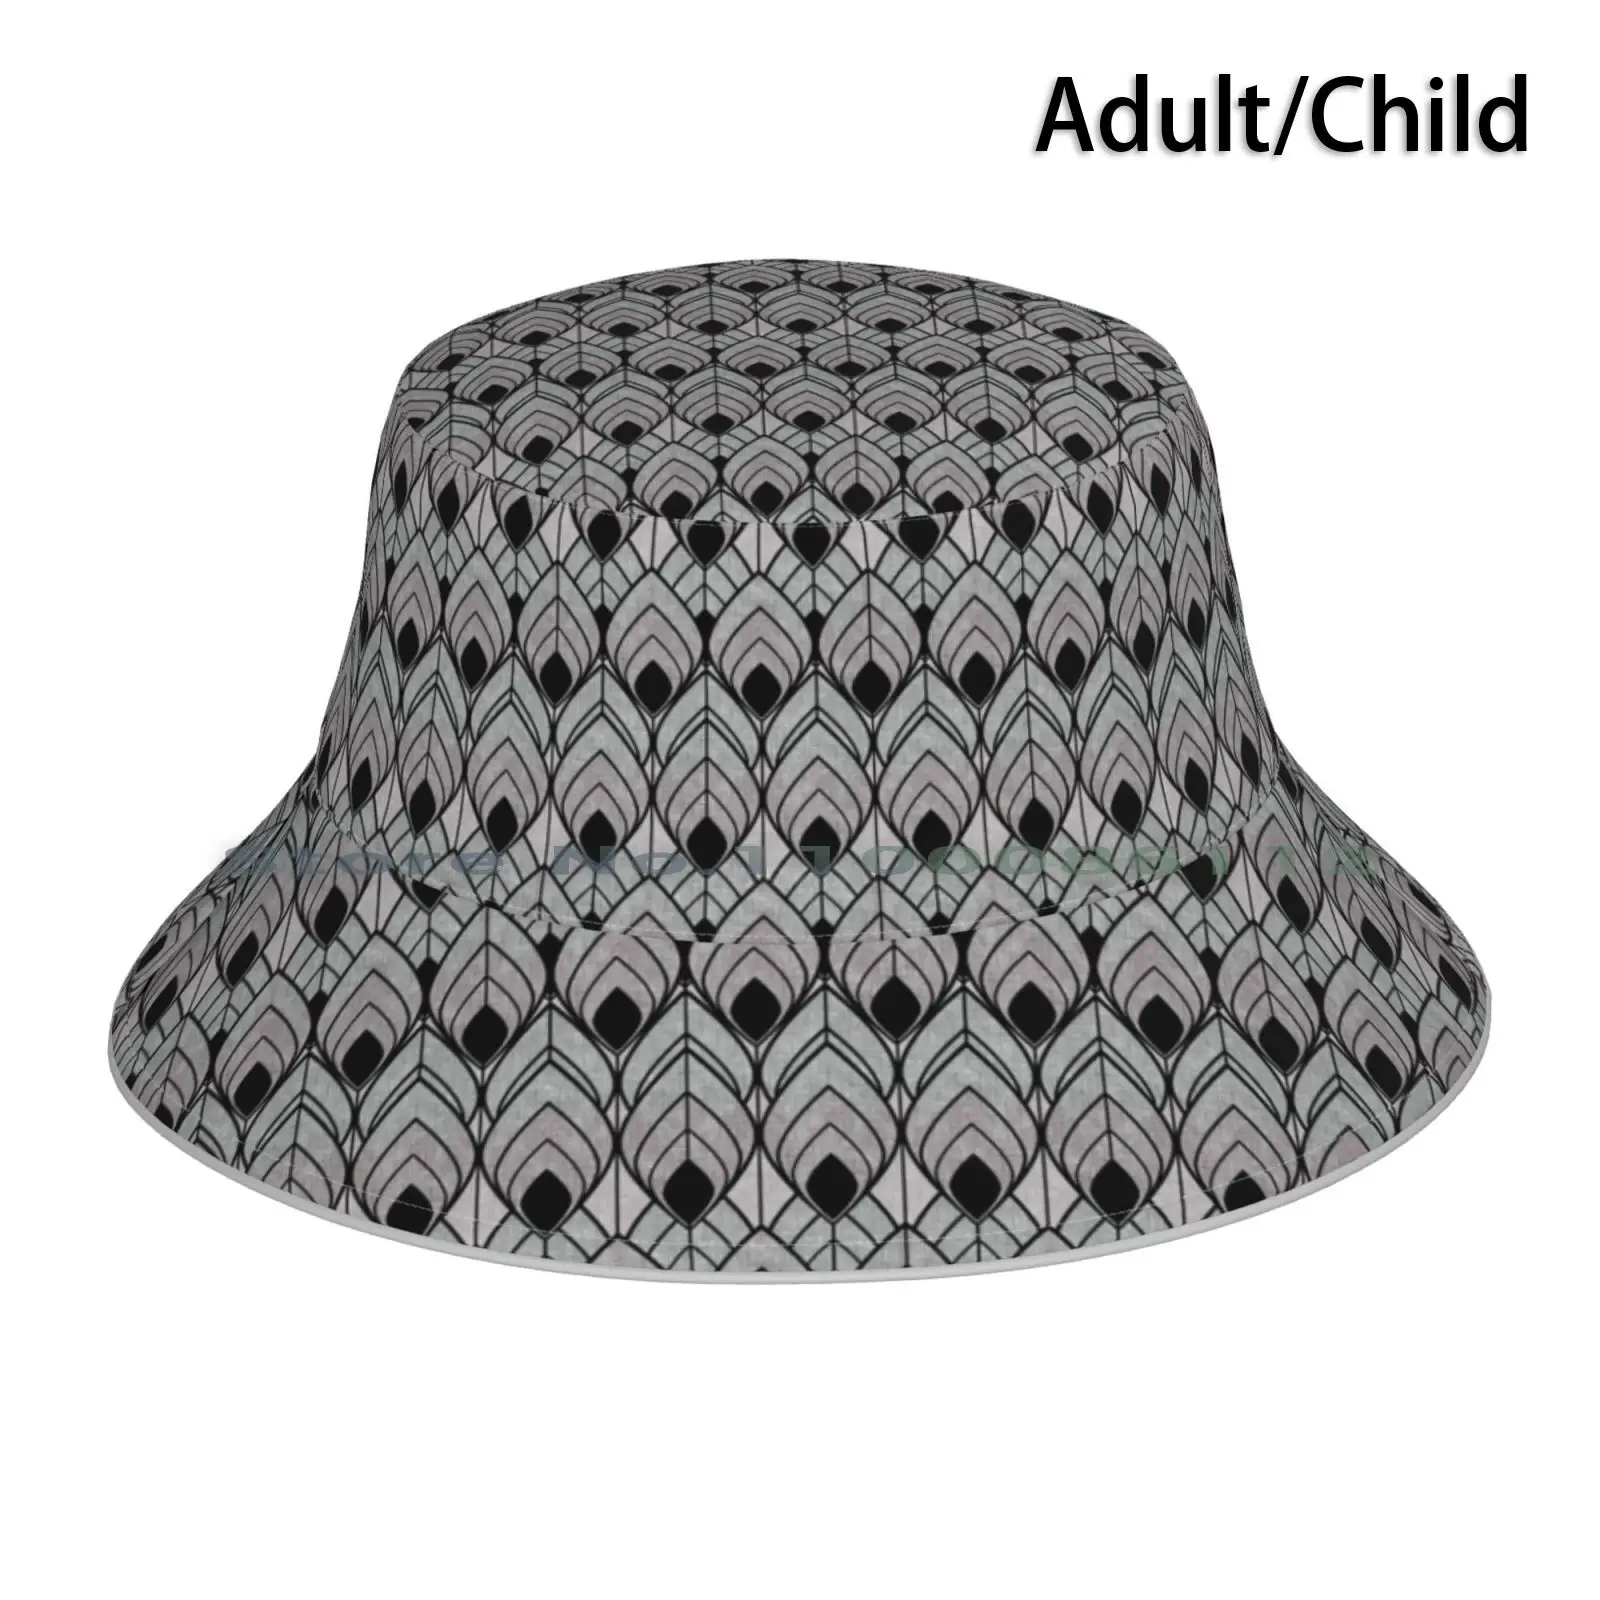 

Art Deco . Grey And Black. Bucket Hat Sun Cap Art Black And Grey Geometric Waves Abstract Textured Lines Shapes Brimless